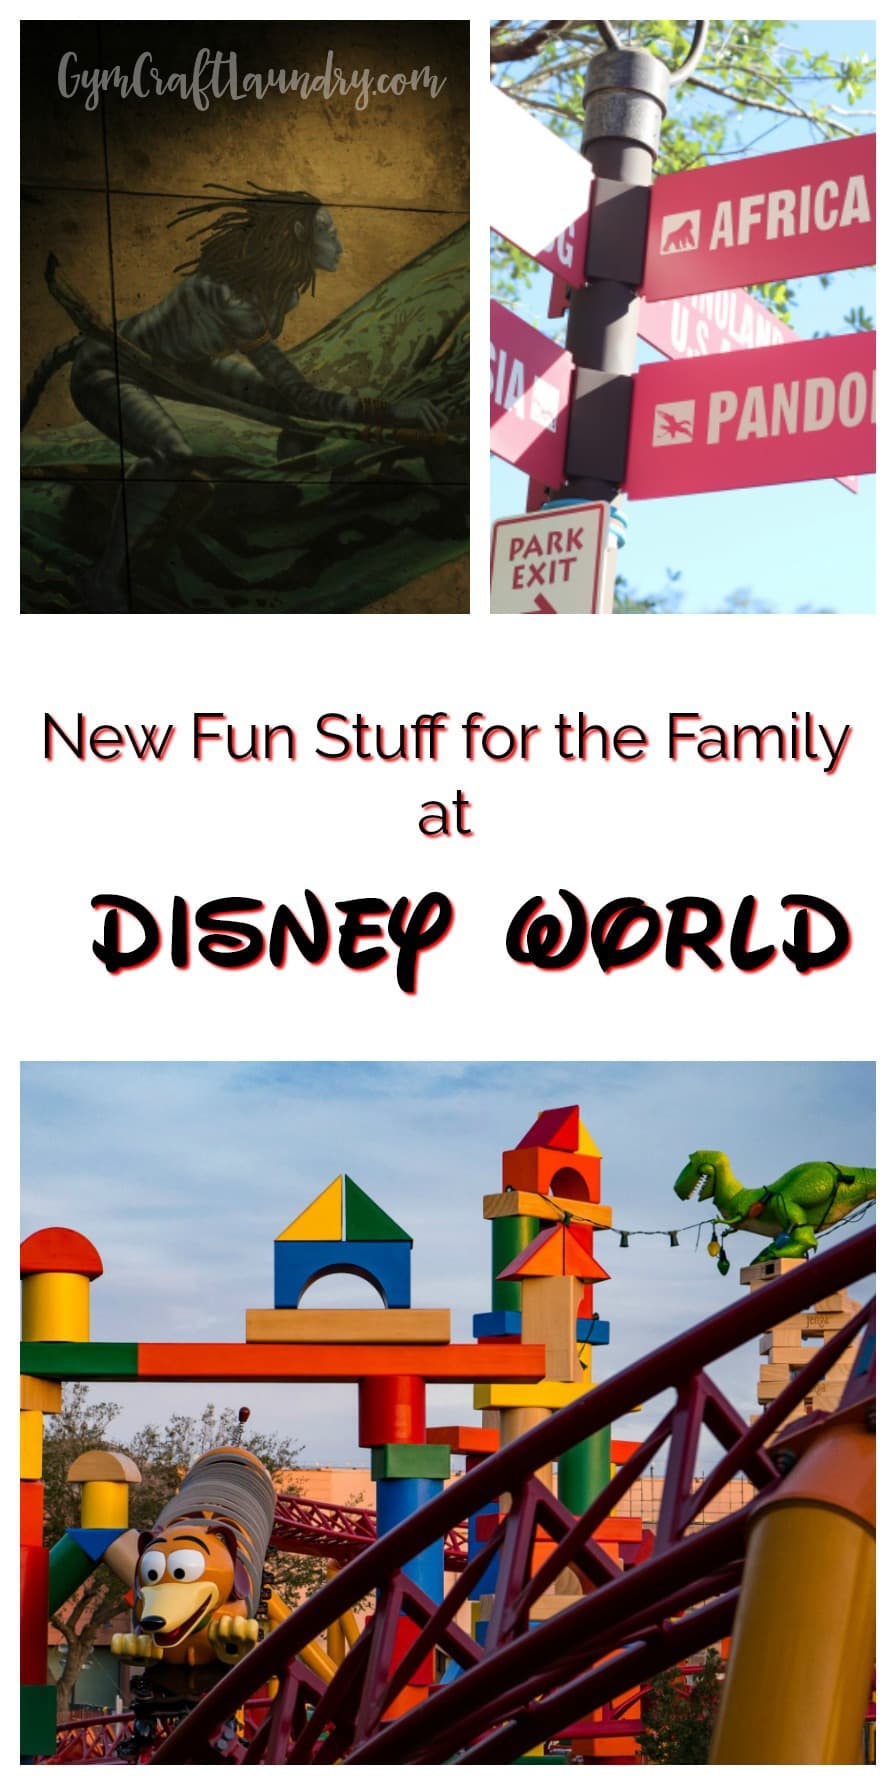 New Stuff for the Family at Disney World